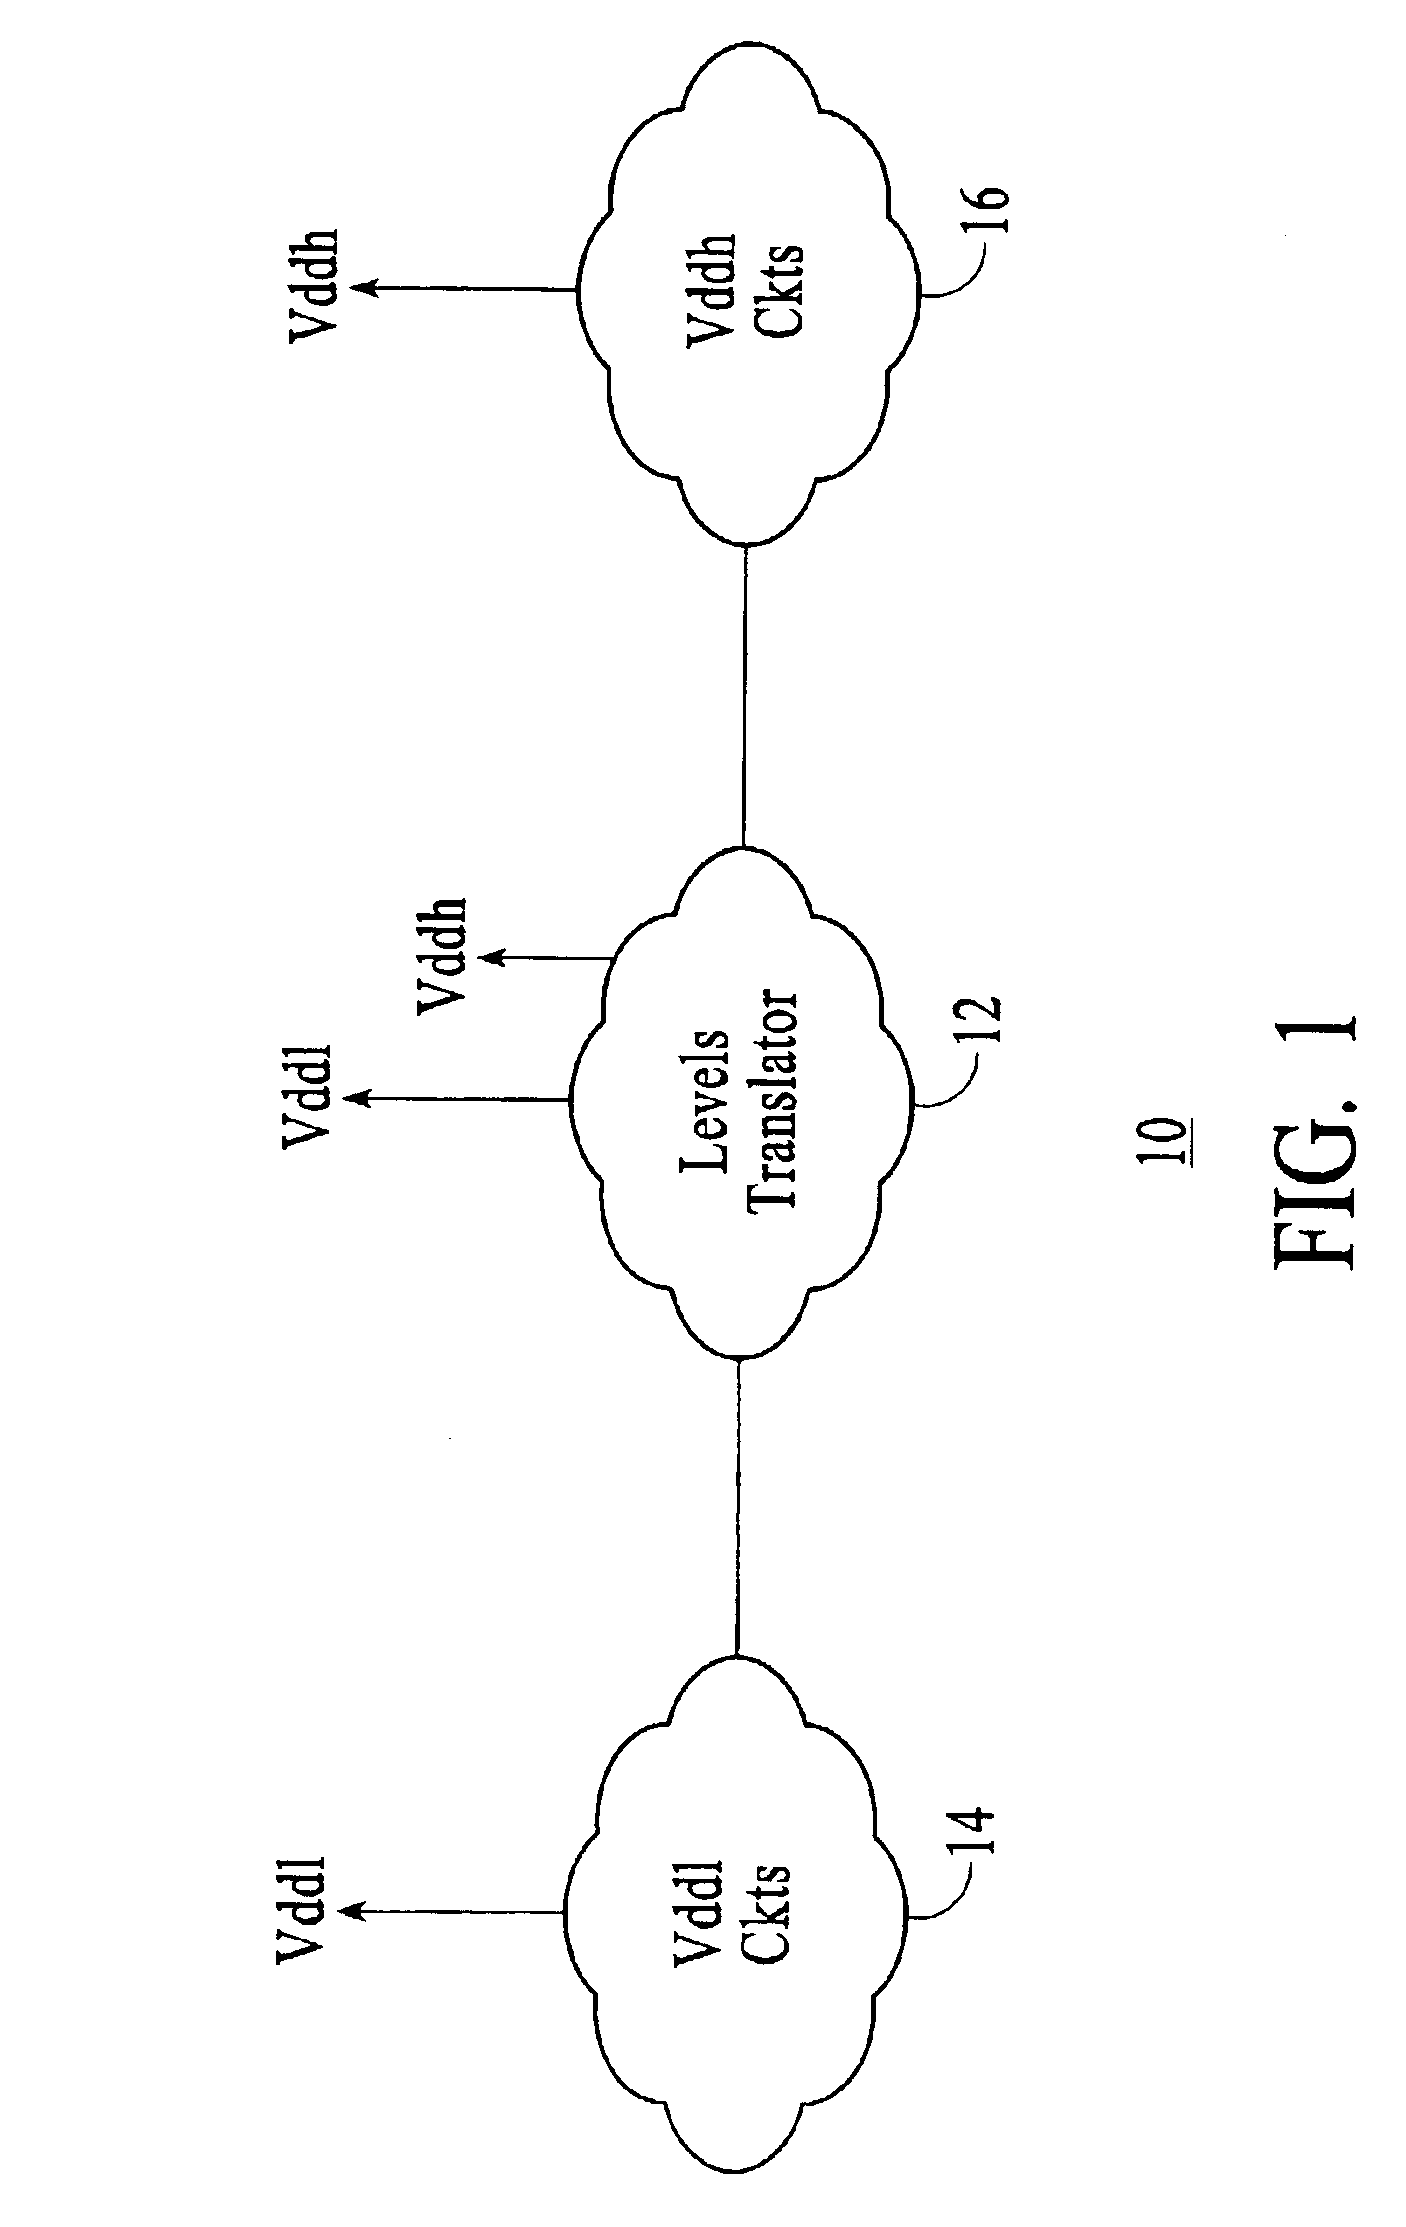 Level translator circuit for power supply disablement